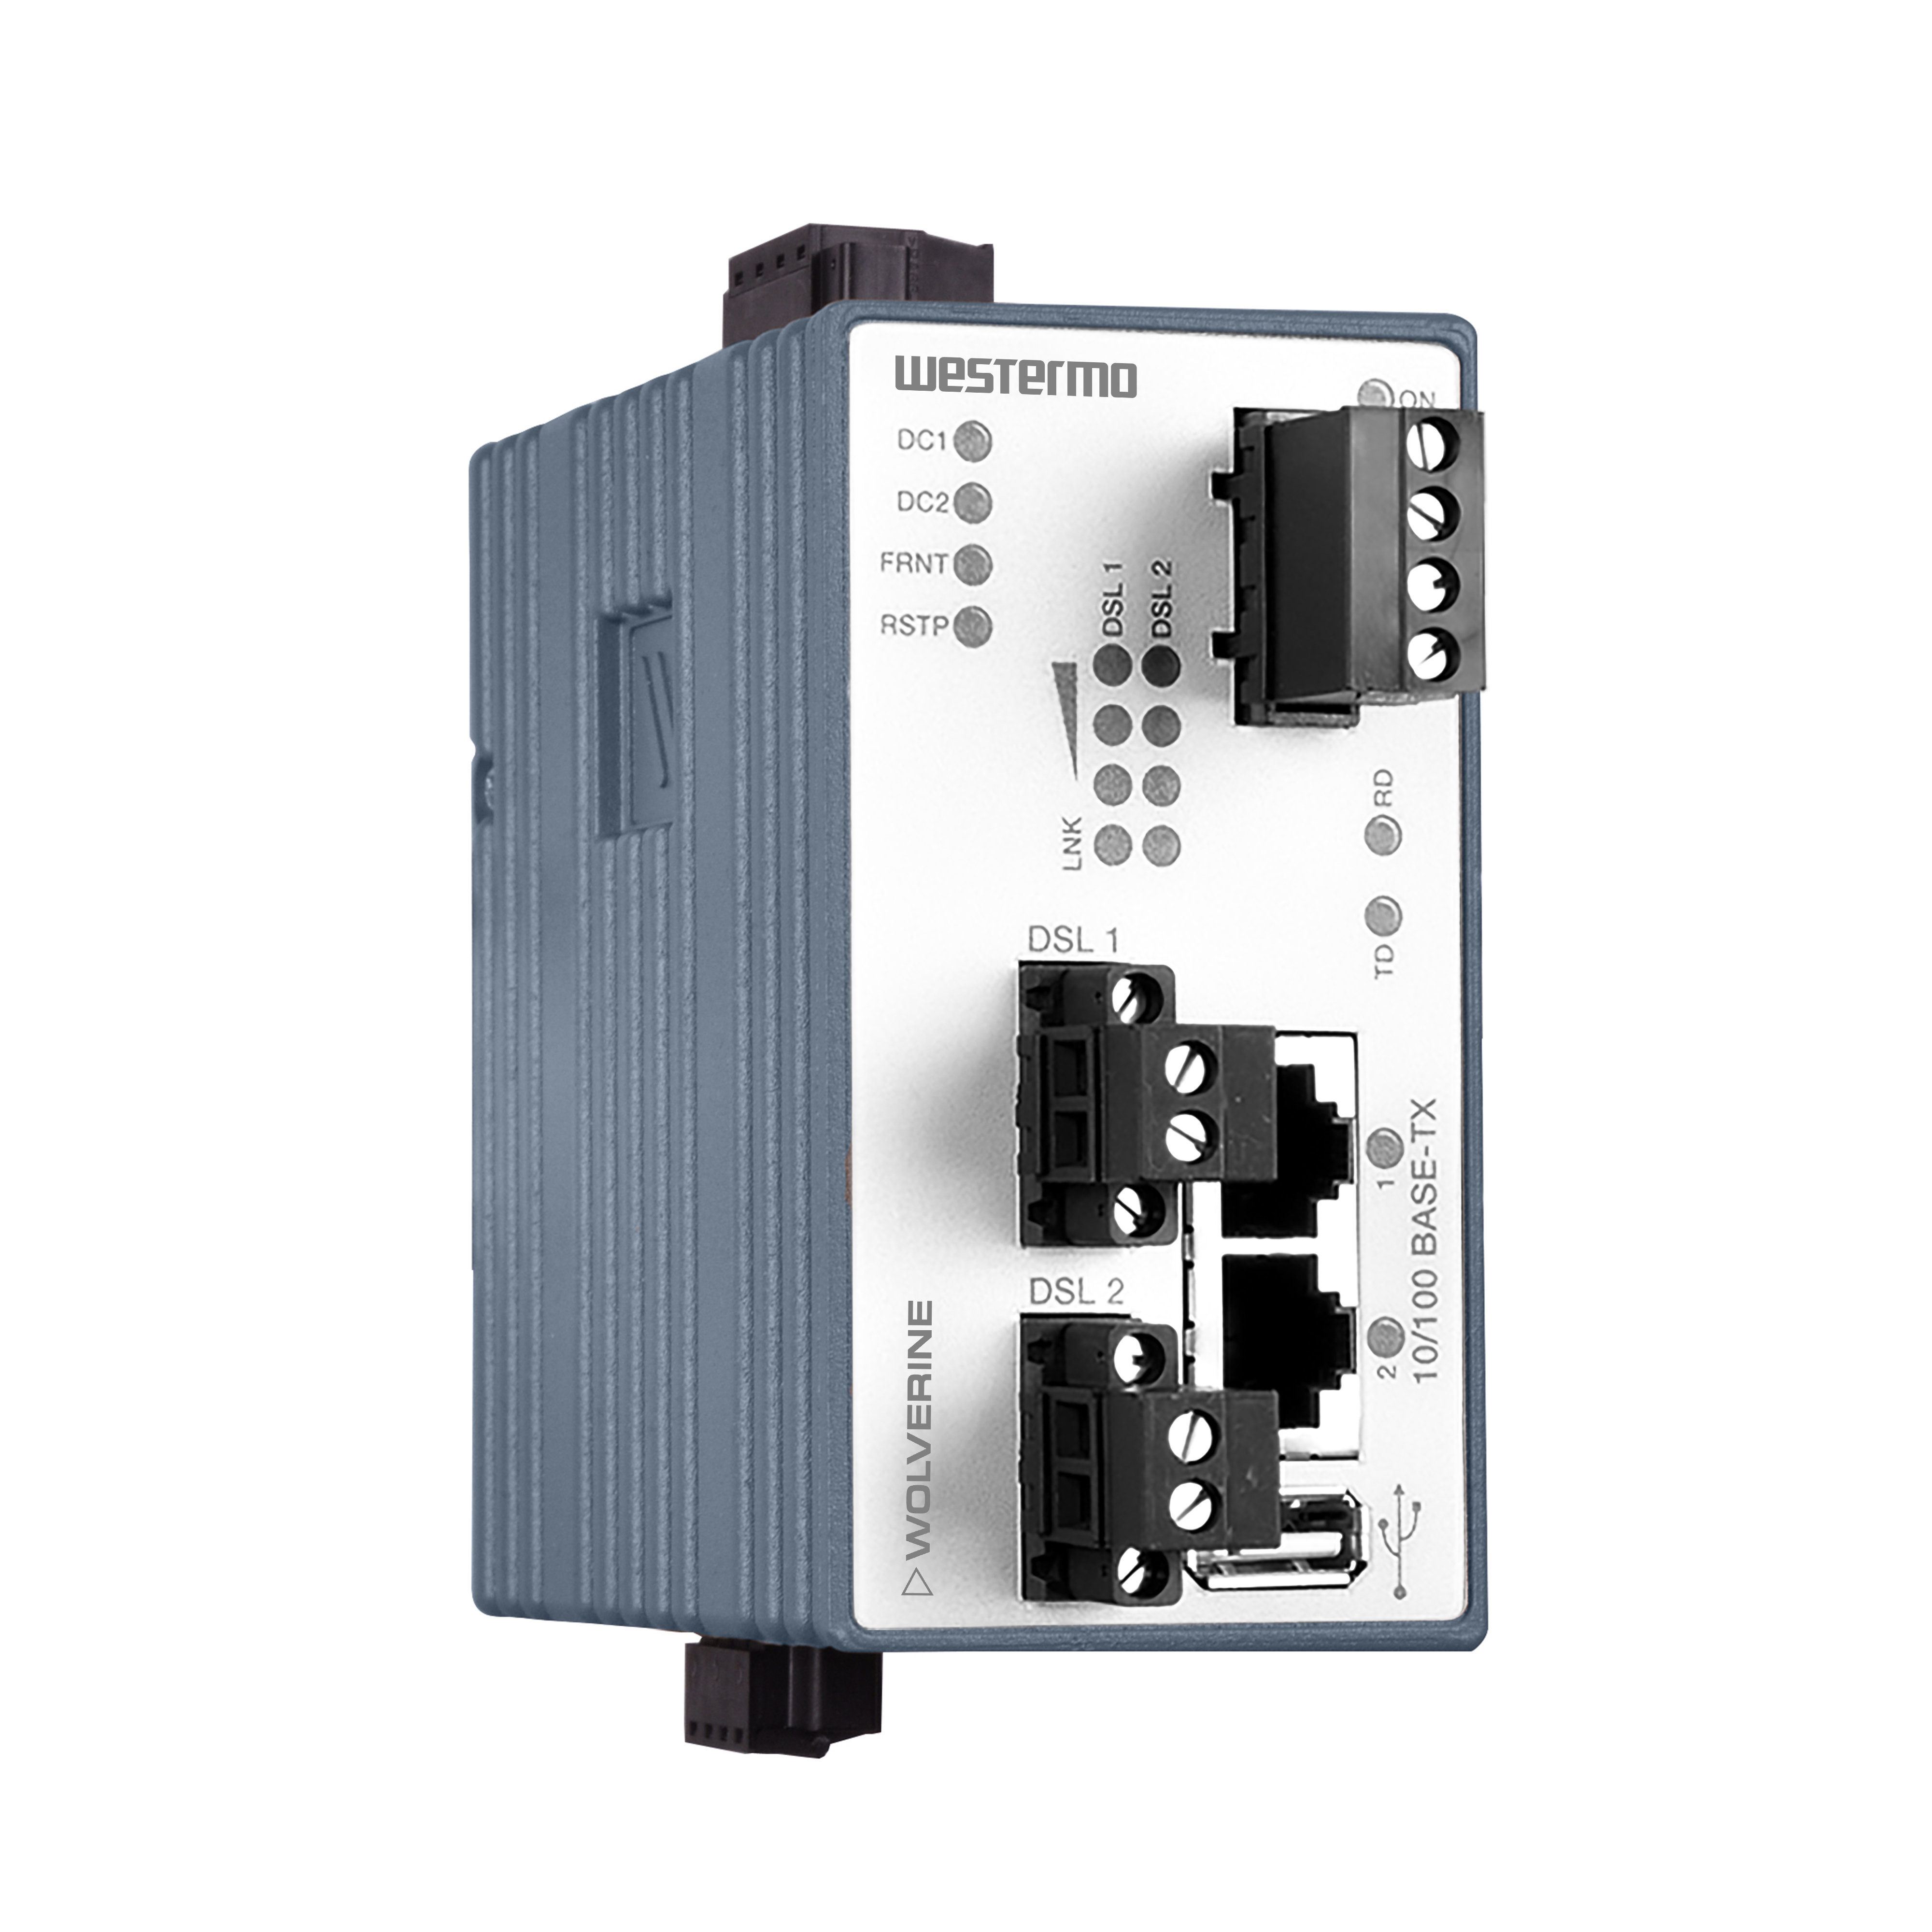 Industrial Ethernet Extender DDW-142/242-485 by Westermo.